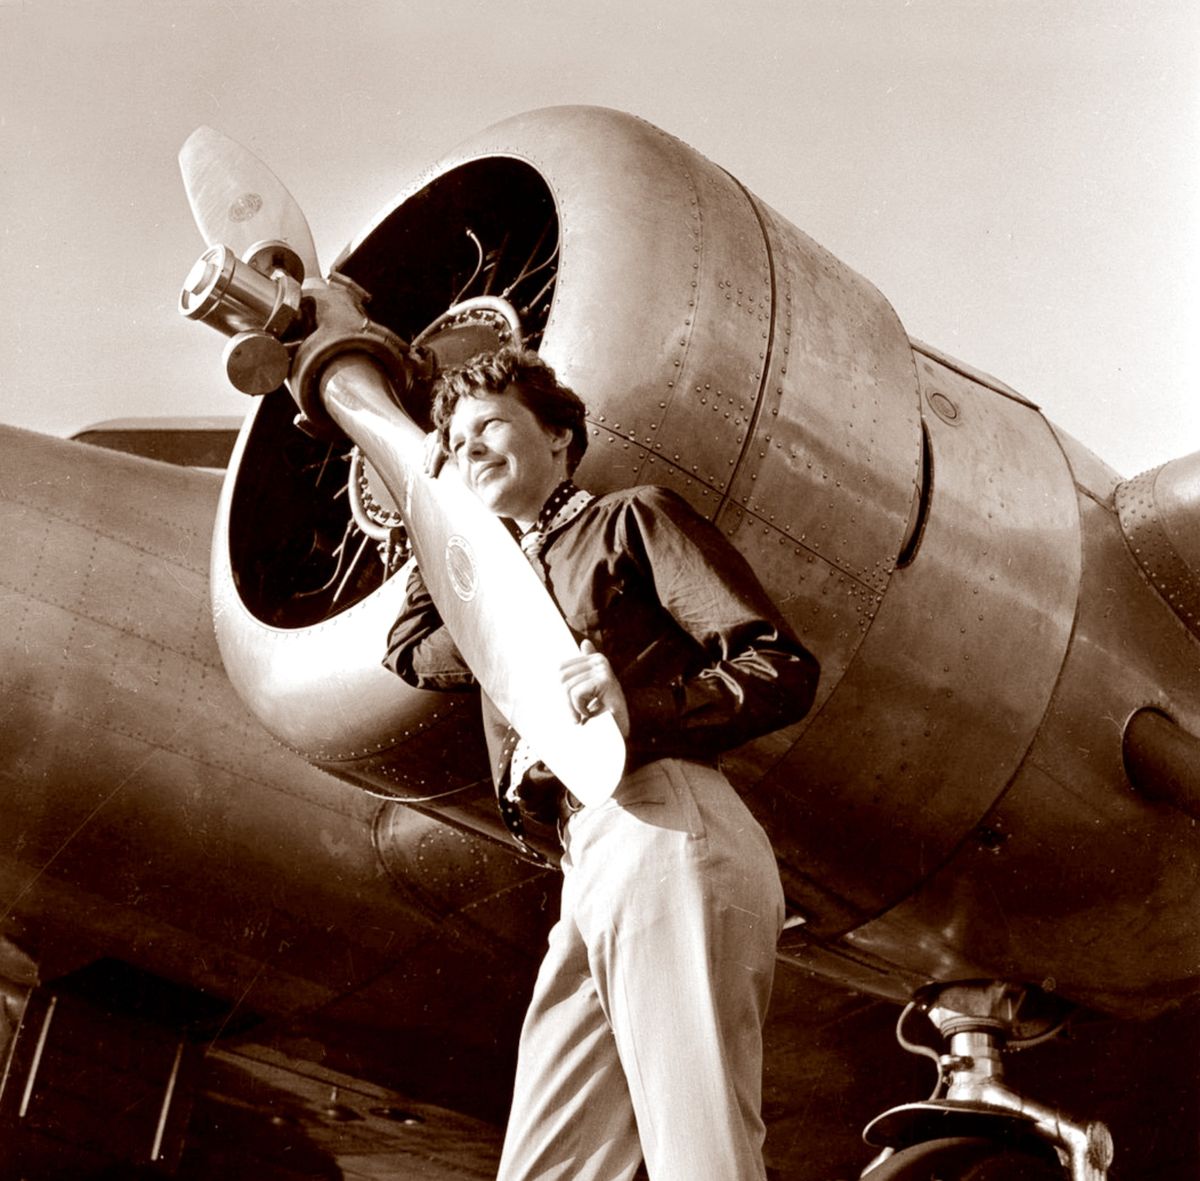 Amelia Earhart poses with her plane in a photo taken by Albert Bresnik at Burbank Airport in Burbank, Calif., on May 20, 1937. (Associated Press)